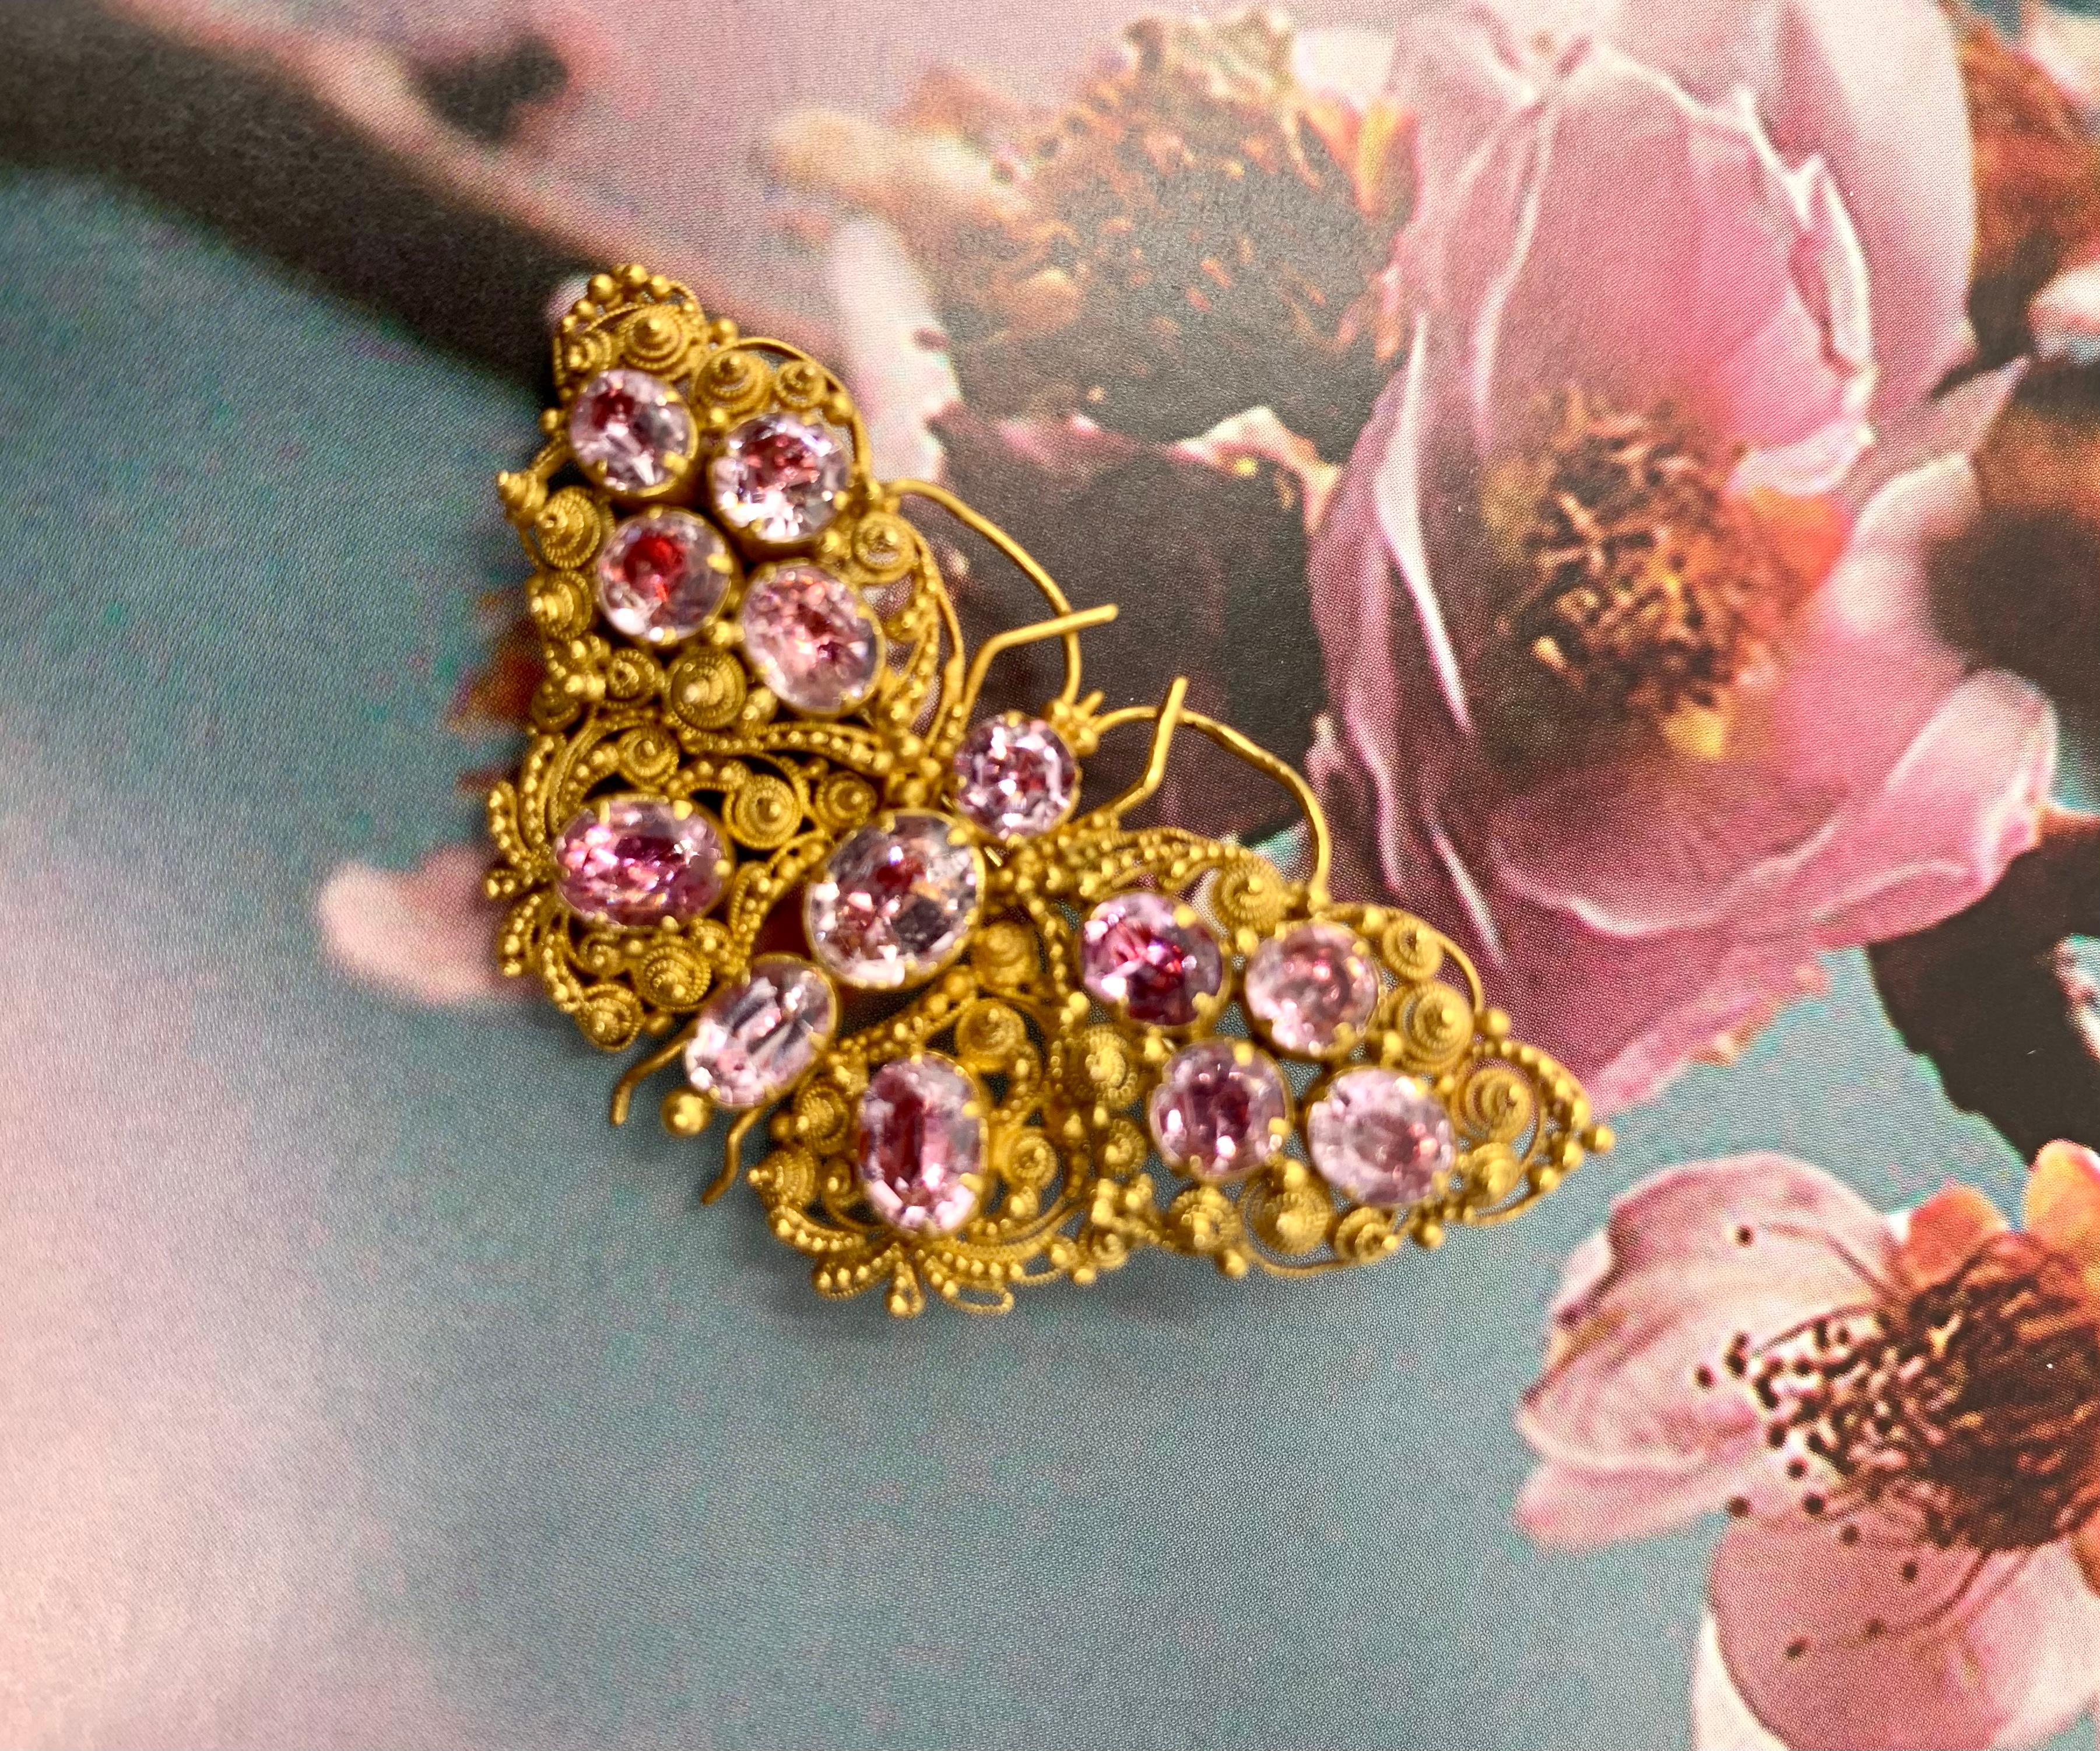 Antique Cannetille jewelry is highly admired for its exquisitely detailed hand wrought gold work reputedly inspired by fine lace embroidery of the 18th century. The romantic aethetic of Cannetille jewels celebrates the beauty of nature in the